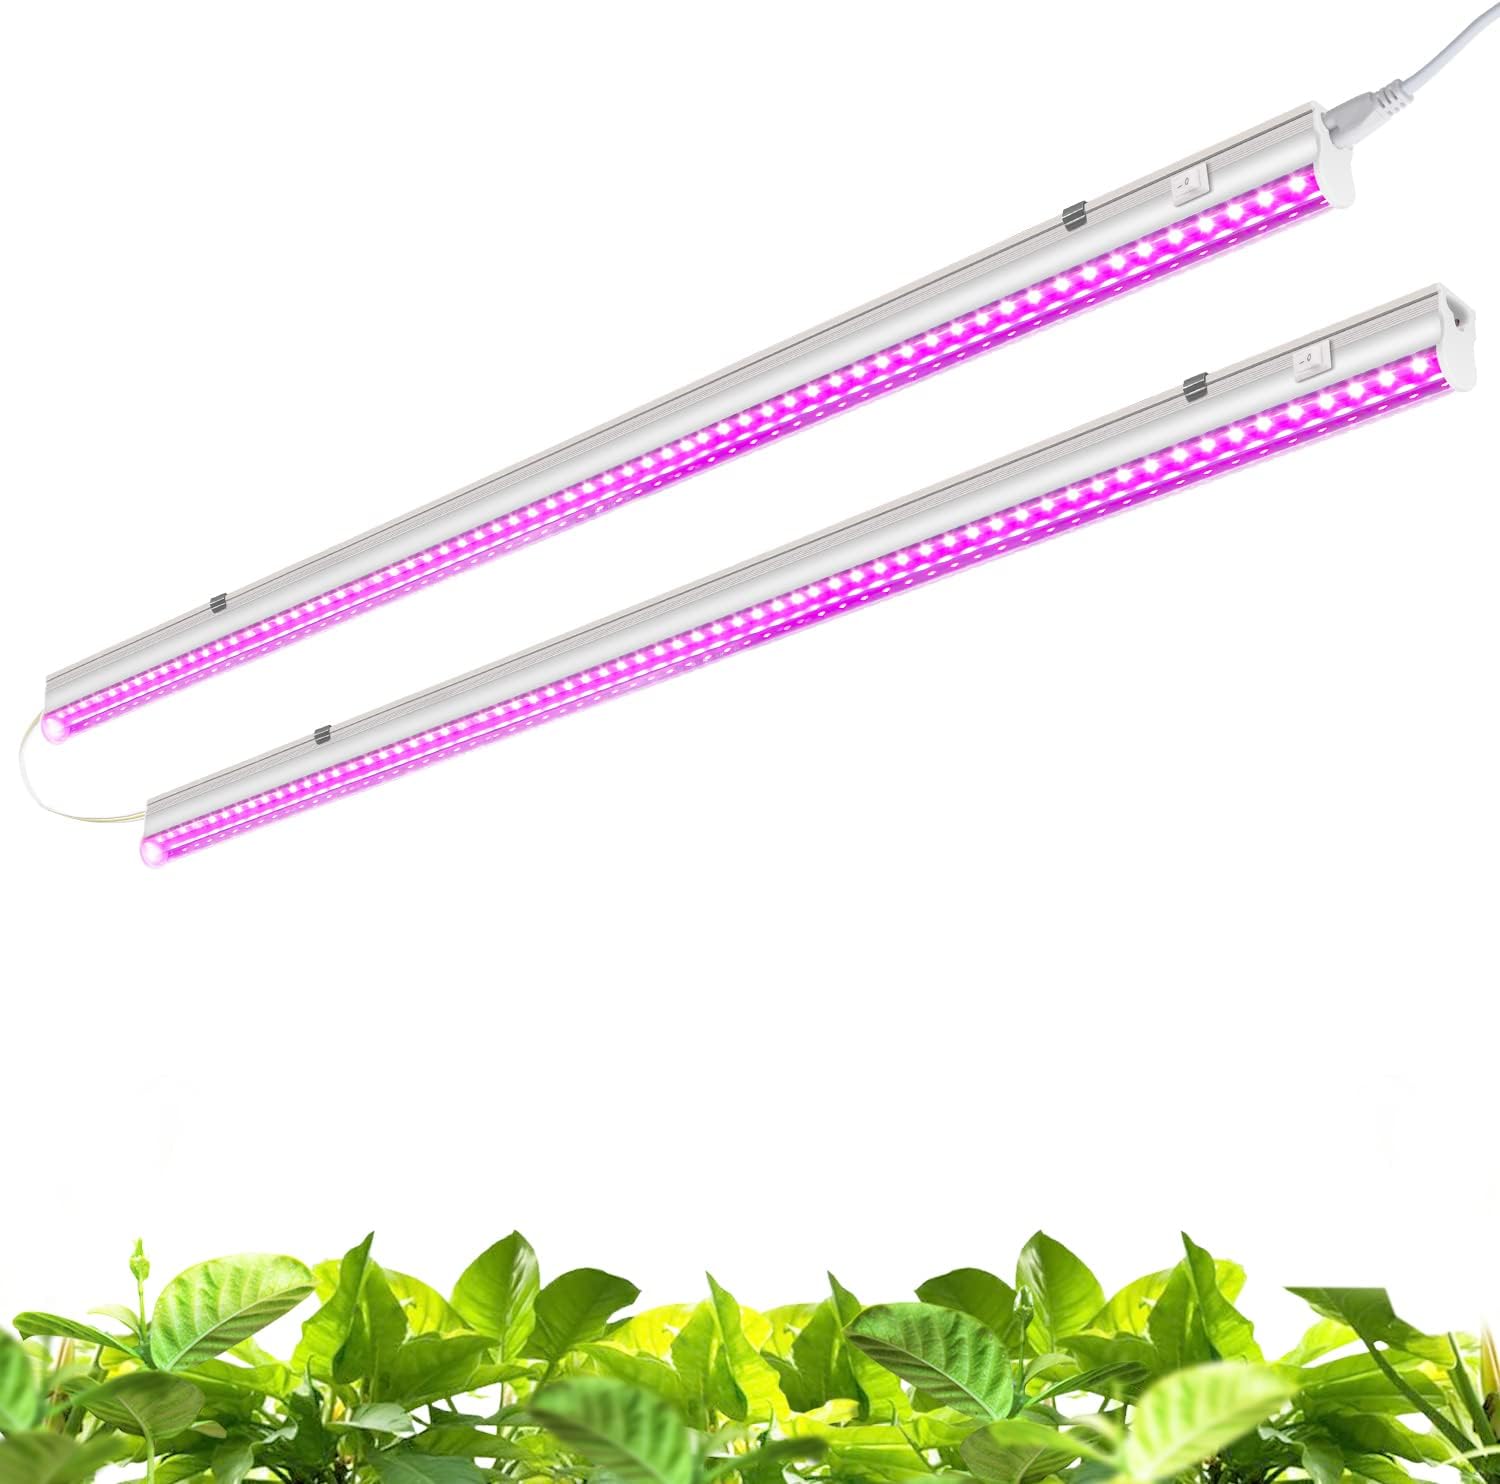 Monios-L T5 LED Grow Lights 4ft, 2 Pack, 20W each, Full Spectrum, Easy Installation, Ideal for Seed Starting, Microgreens, Hydroponics, Green Leafy Vegetables